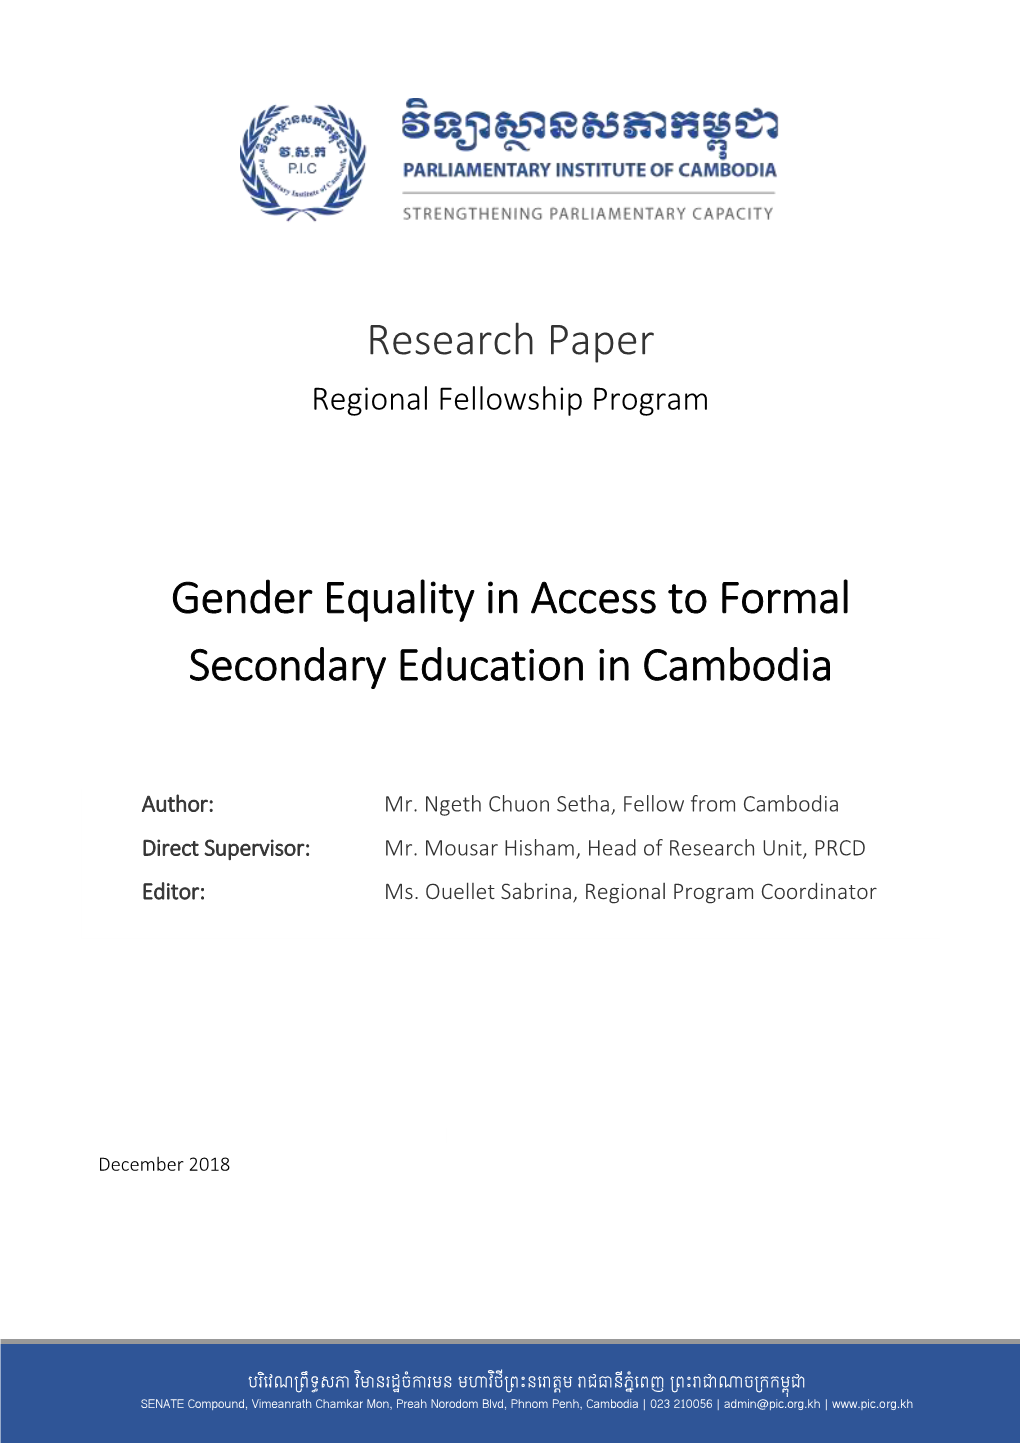 Gender Equality in Access to Formal Secondary Education in Cambodia